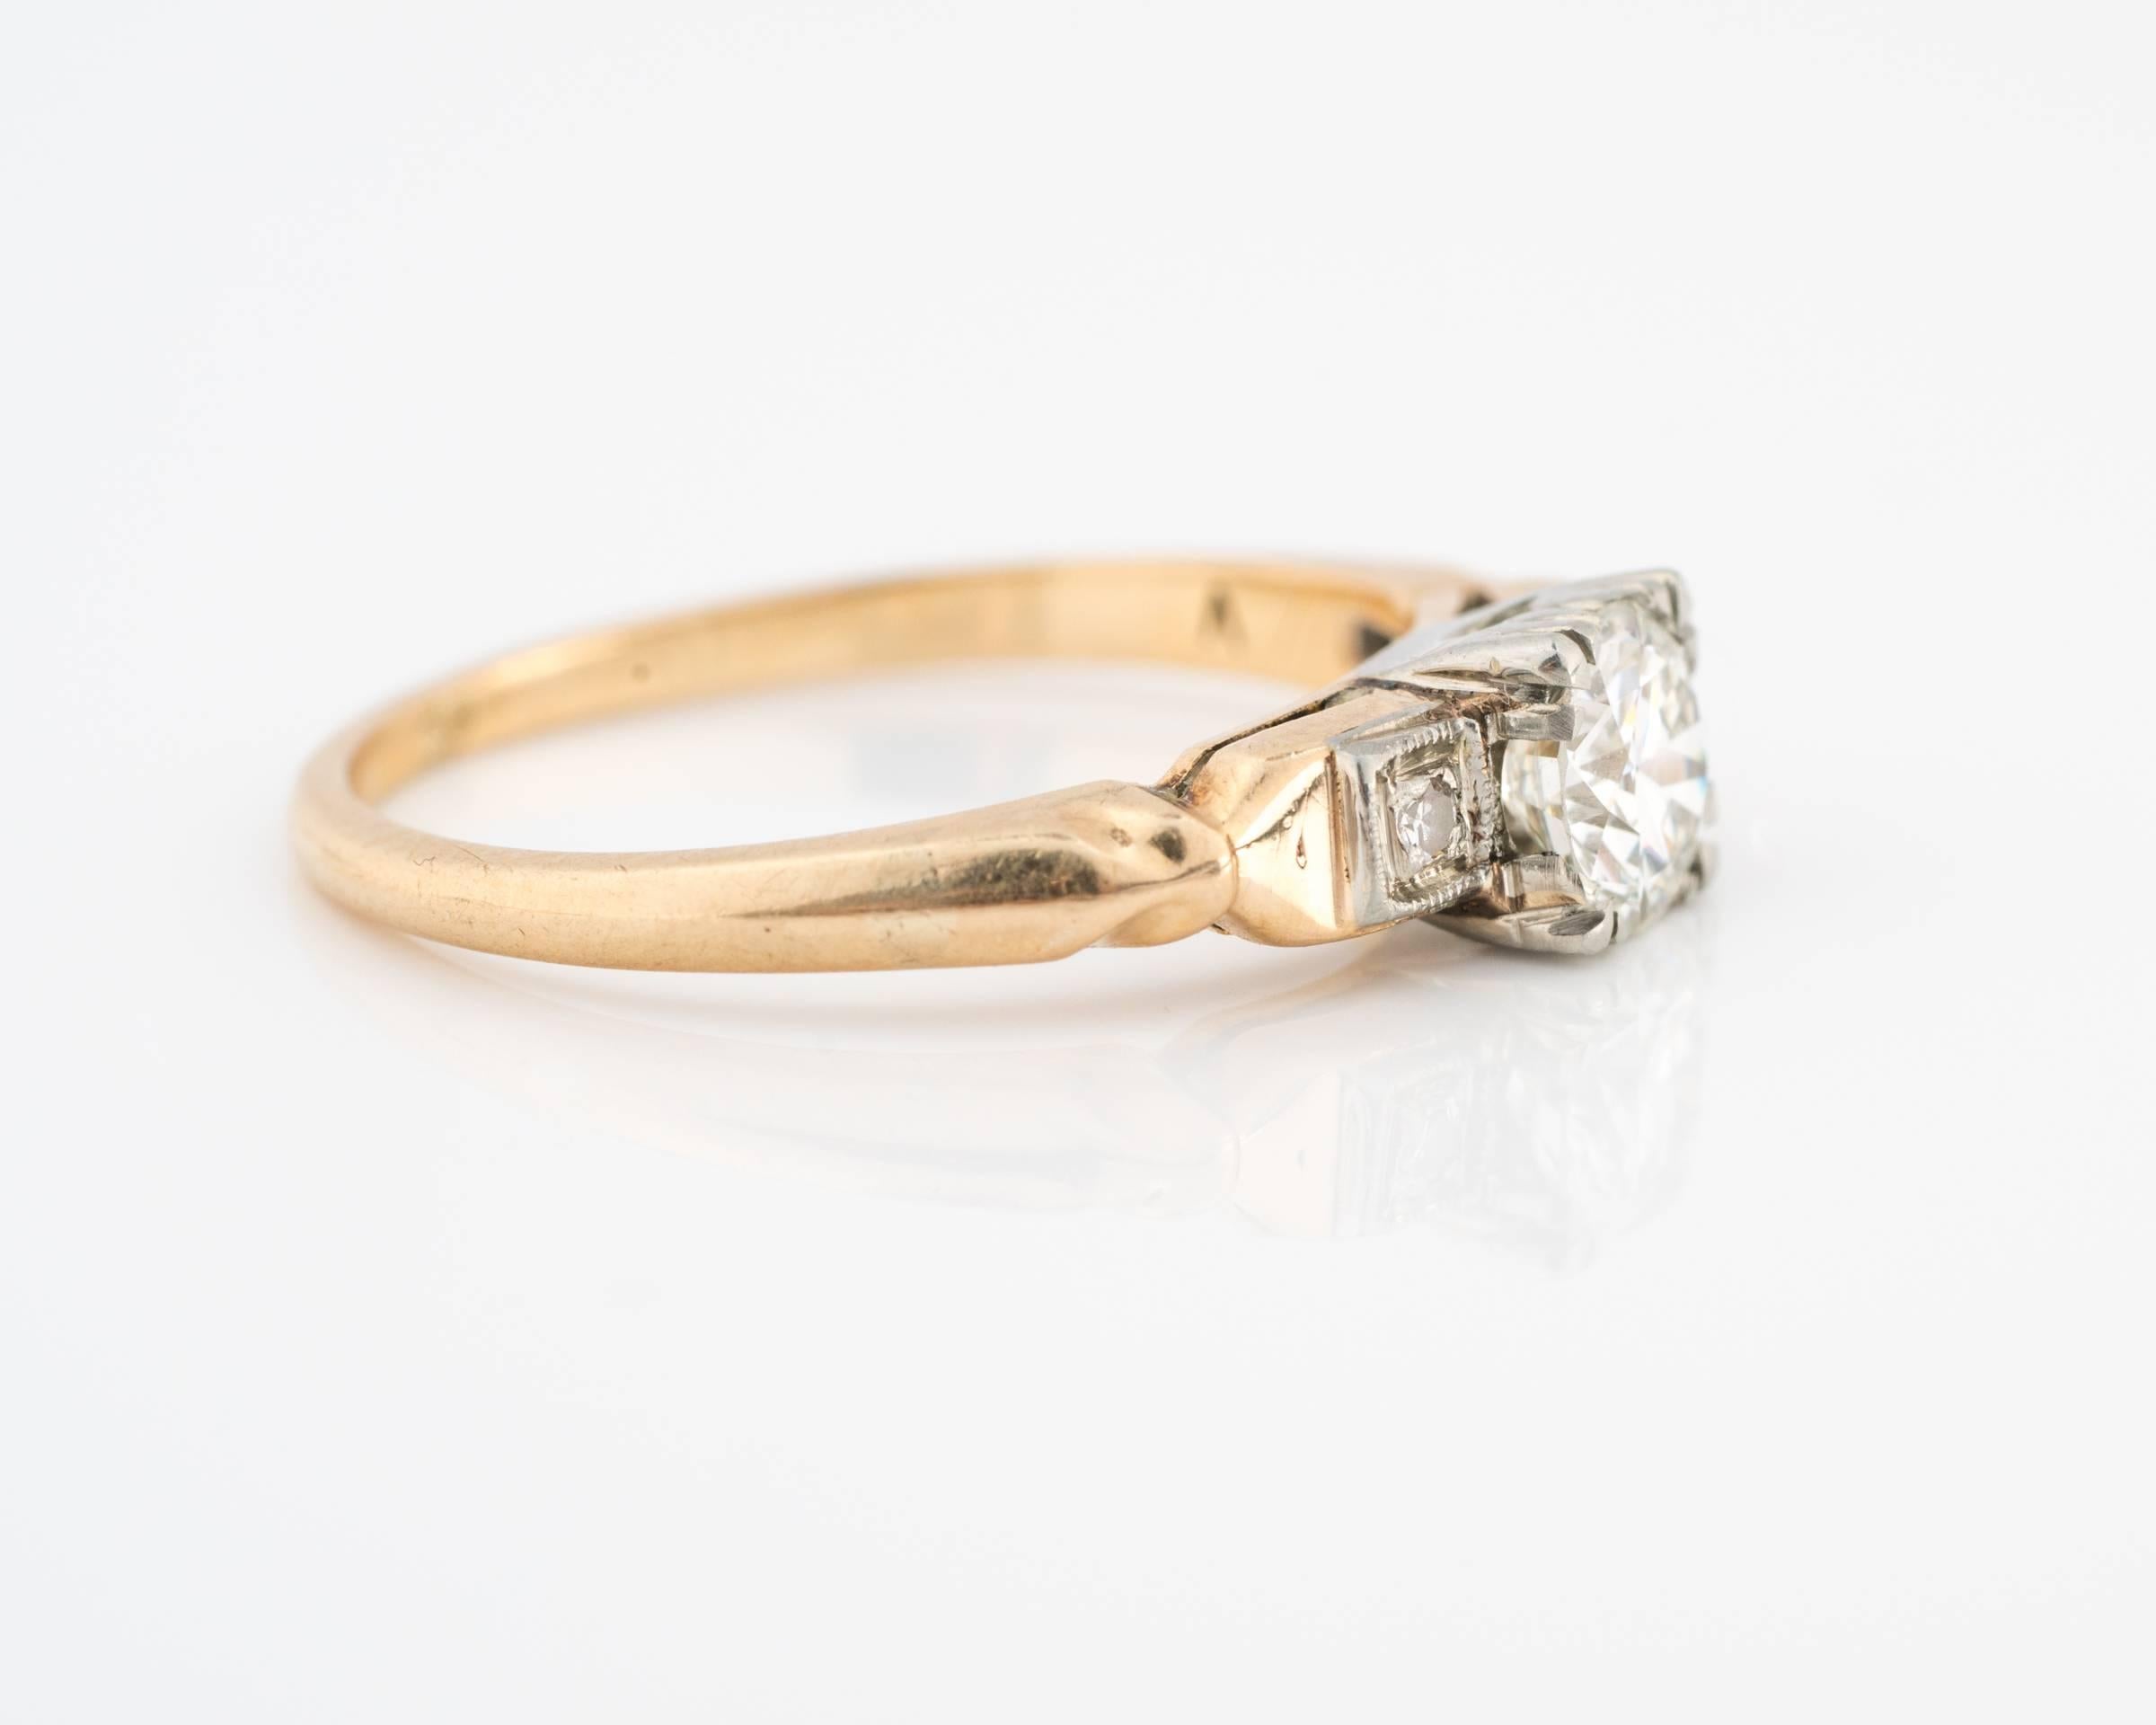 Beautiful mid 1920s Diamond Engagement Ring featuring a 0.42 carat center diamond, H color, VVS2 clarity. This diamond is GIA certified. The ring is made of two-tone metal: 14 karat white gold top and 18 karat yellow gold shank. The shank has a